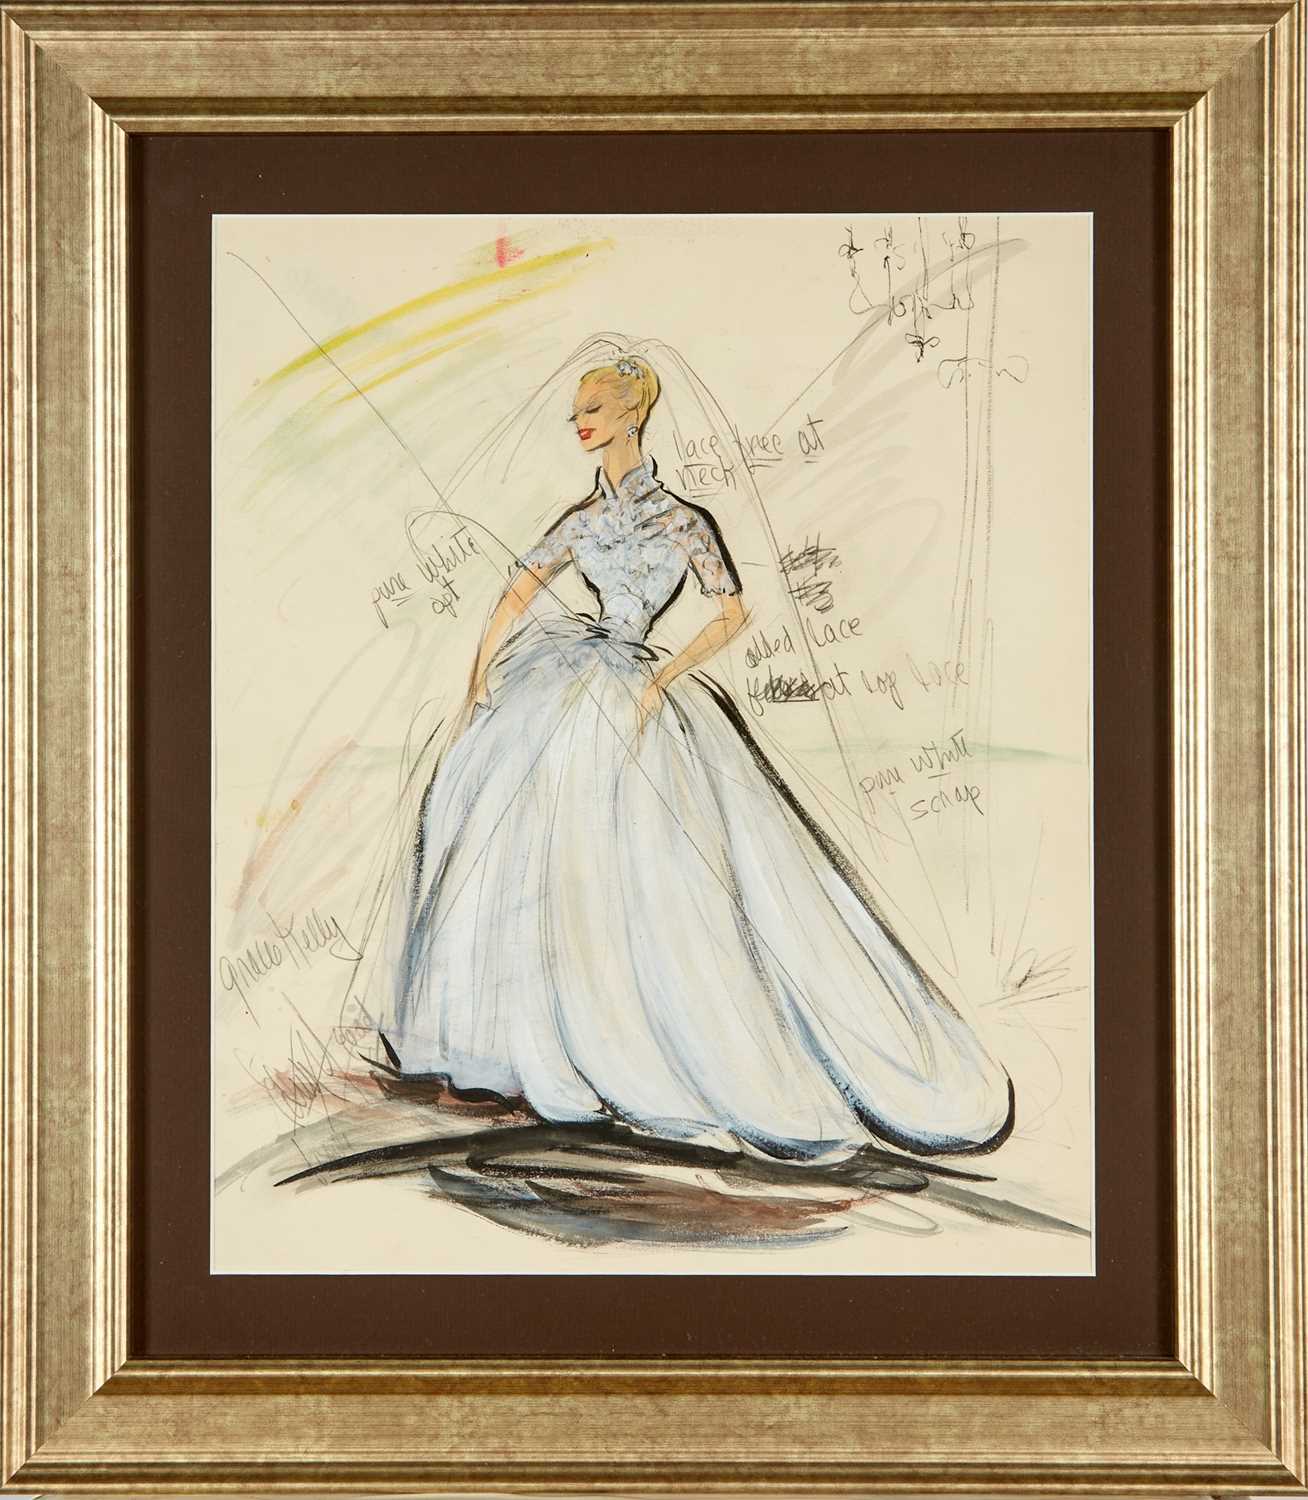 Lot 5103 - An important design by Edith Head for Grace Kelly's unrealized wedding dress